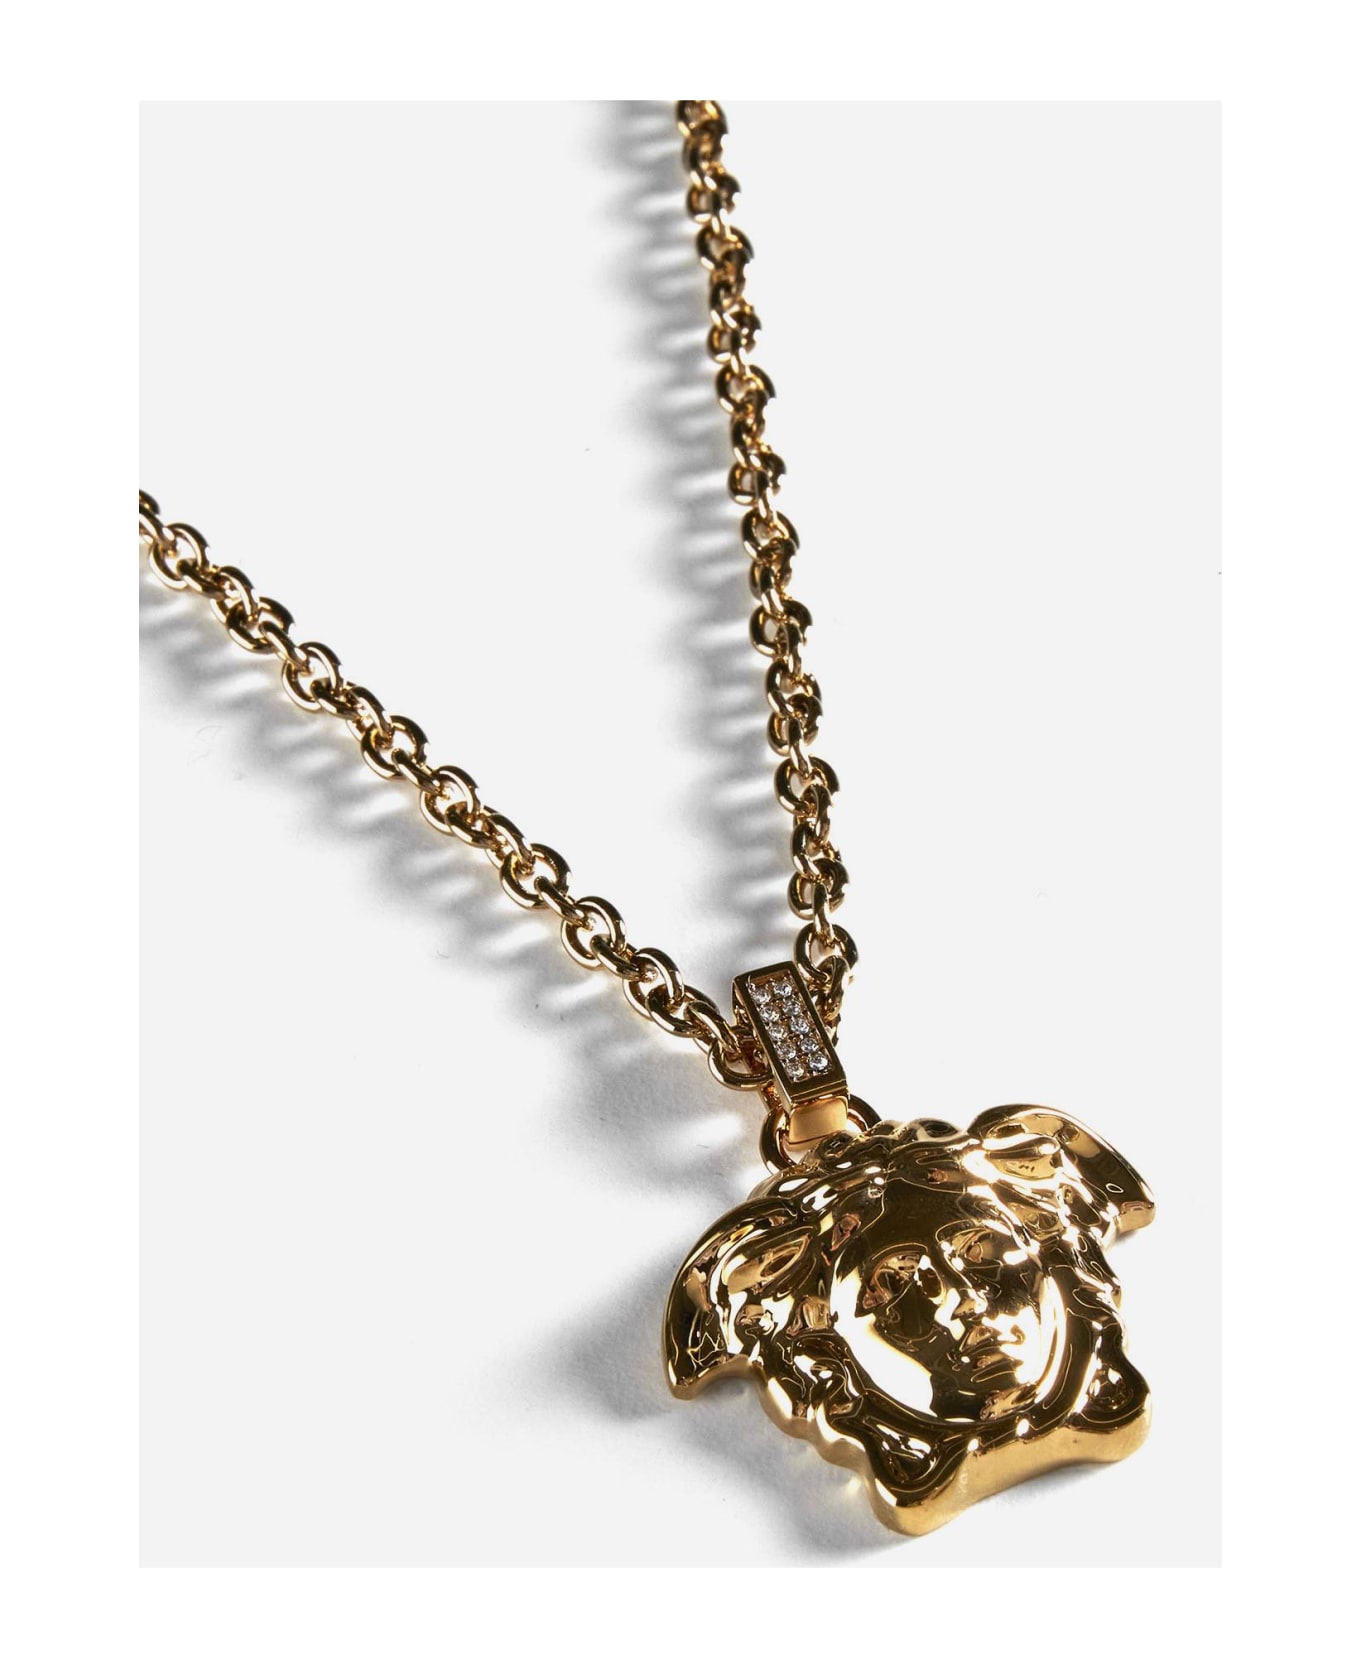 Versace Medusa Pendant Necklace - Oro ネックレス